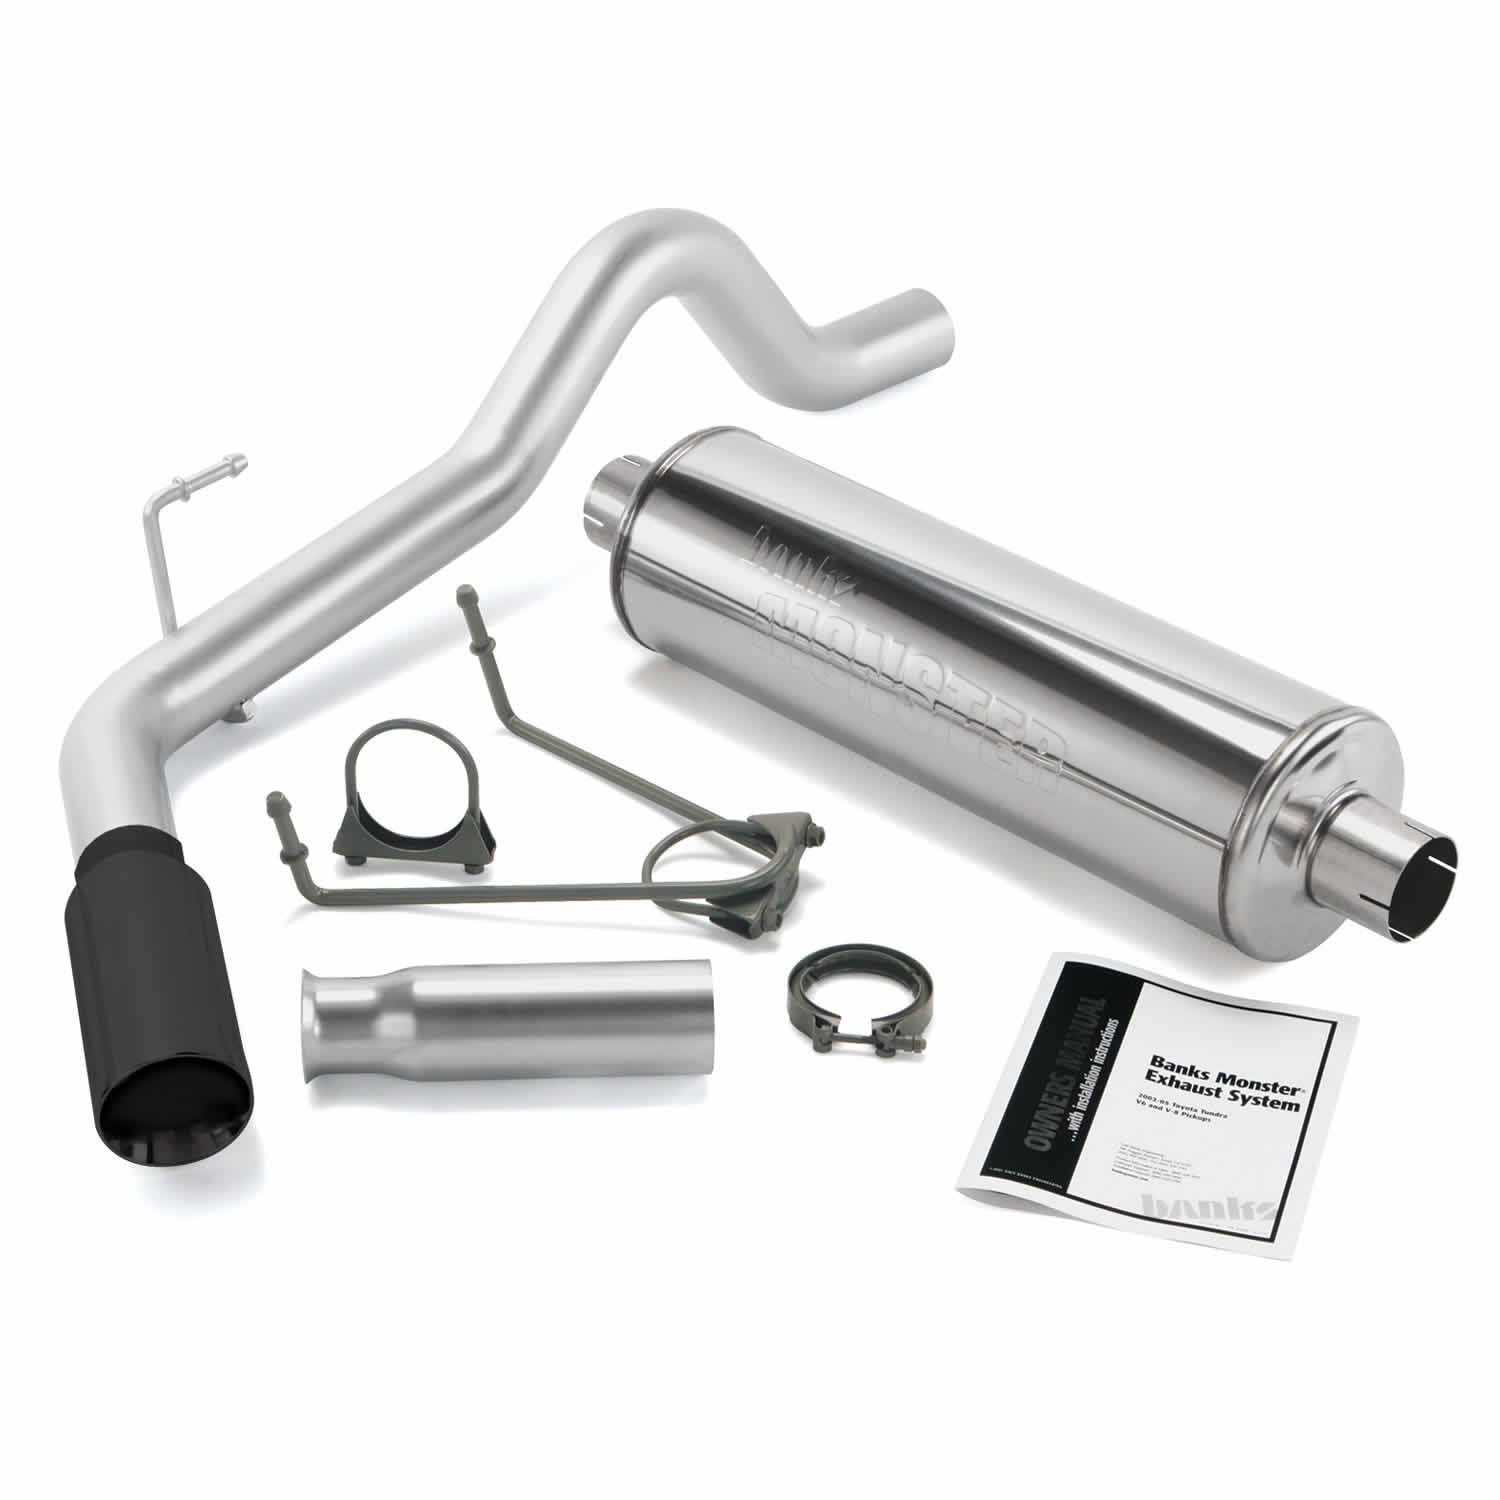 Banks Monster Exhaust system